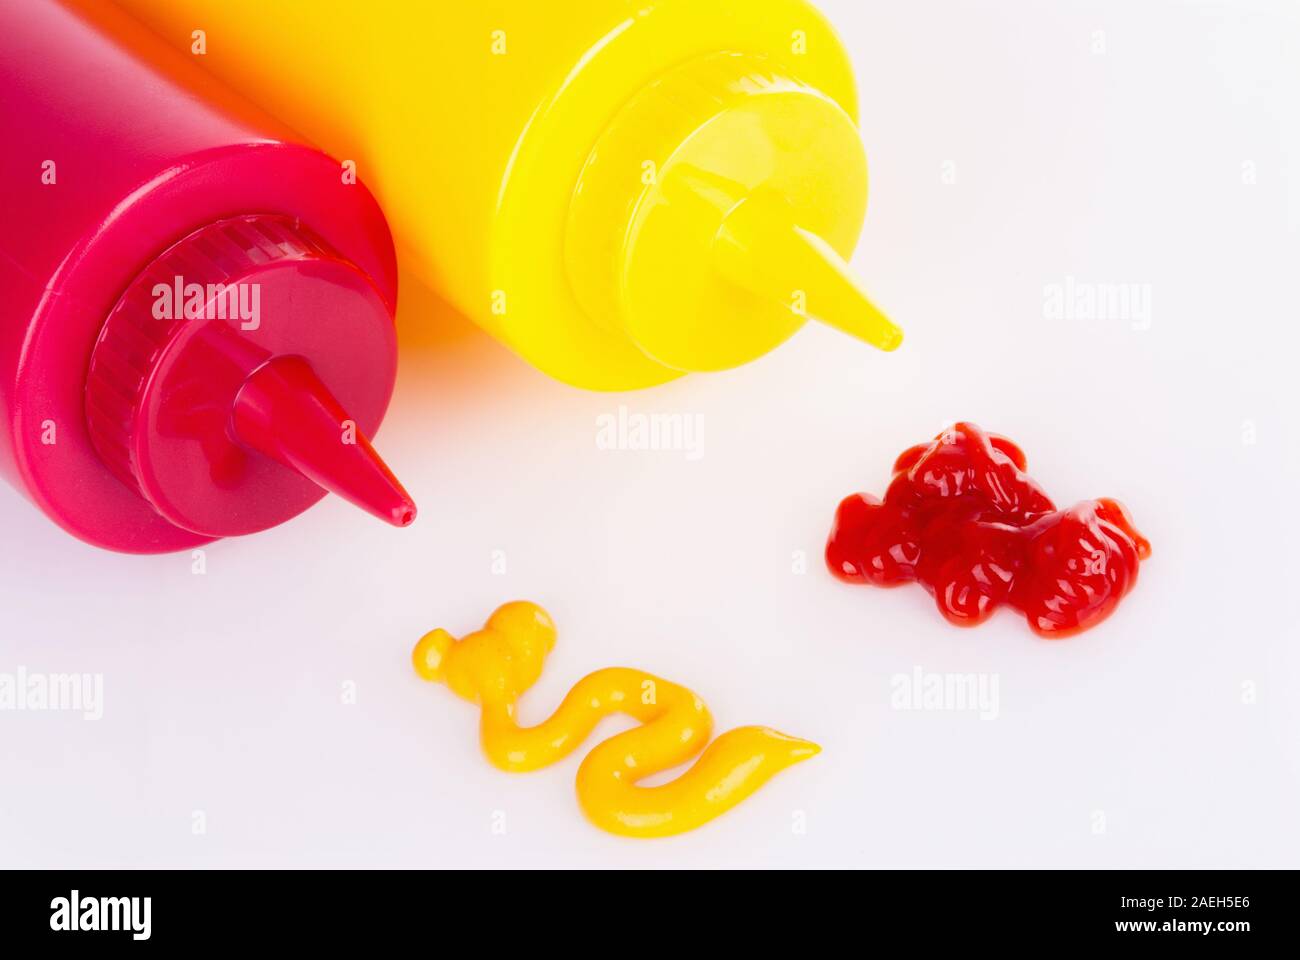 yellow plastic mustard bottle and a red plastic ketchup bottle are side by side. The condiment squirts do not match what is inside the bottles. Stock Photo